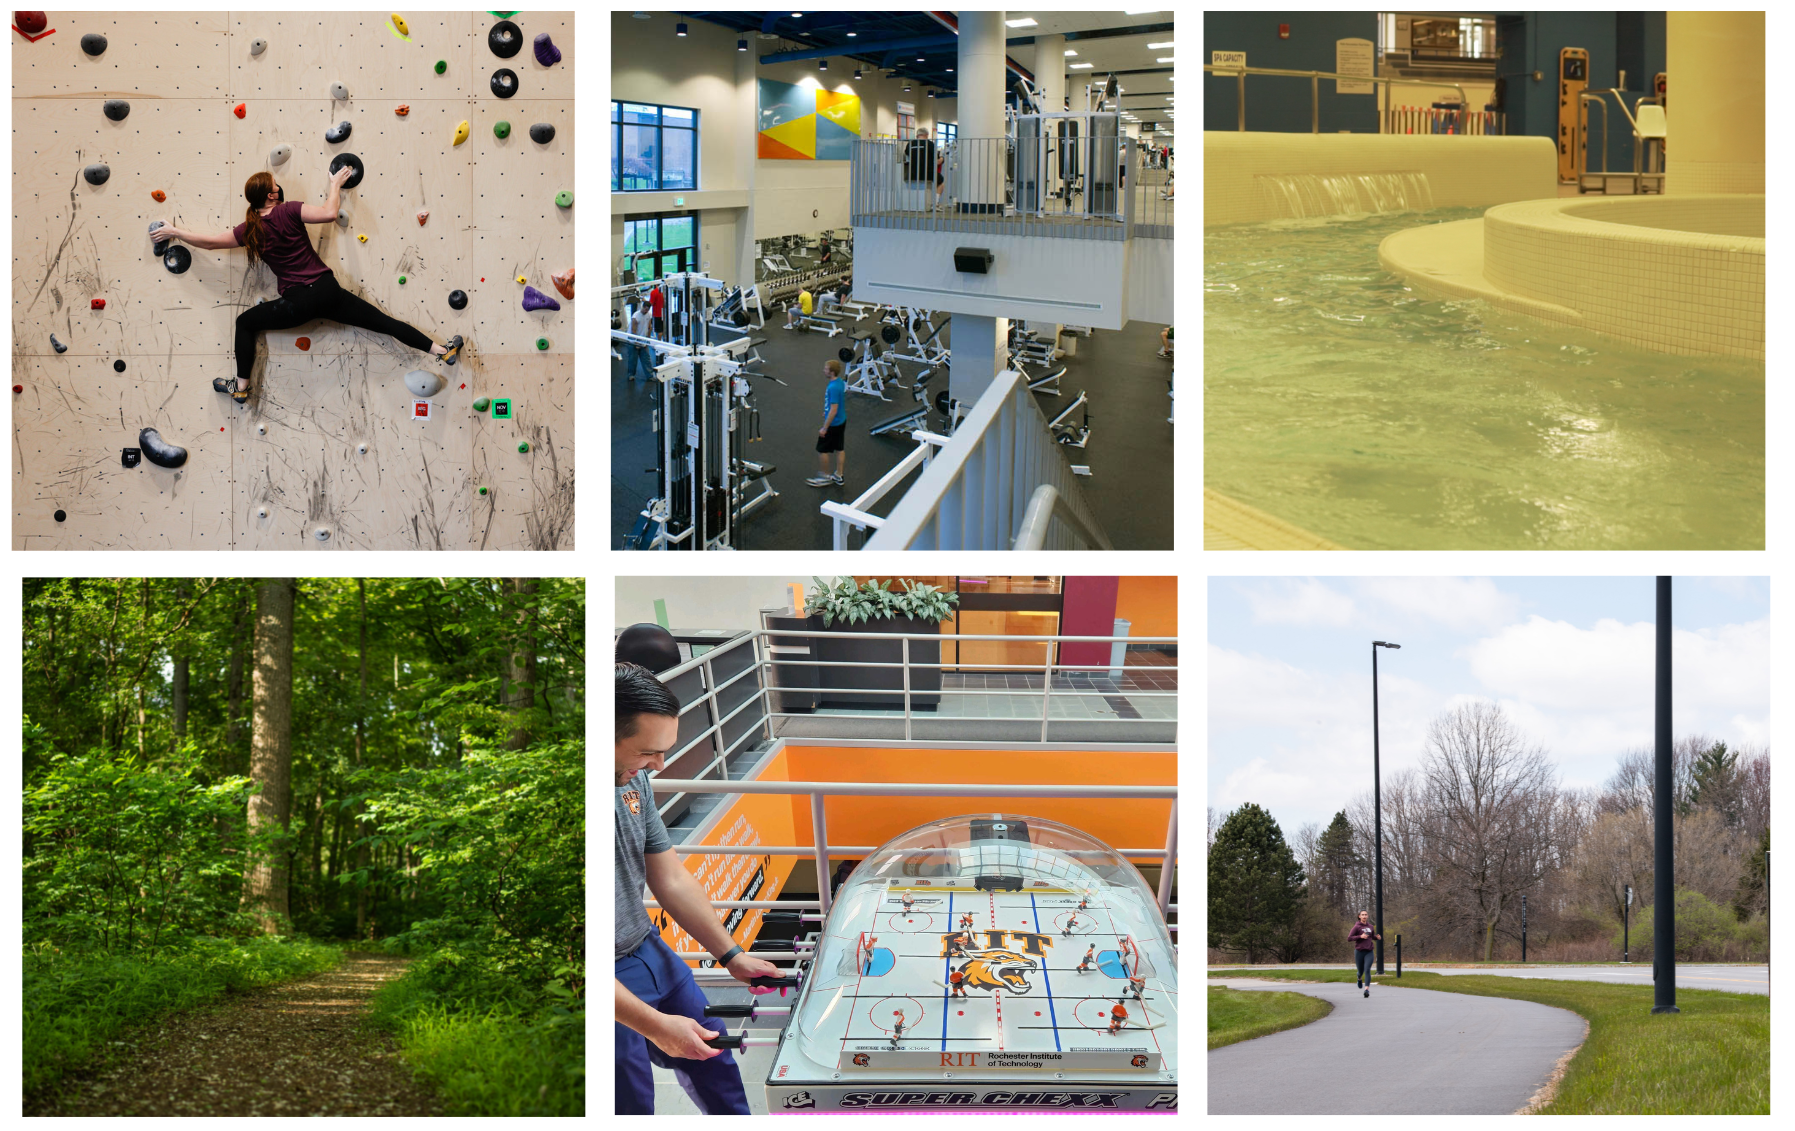 A grid of 6 pictures showing various activities on campus